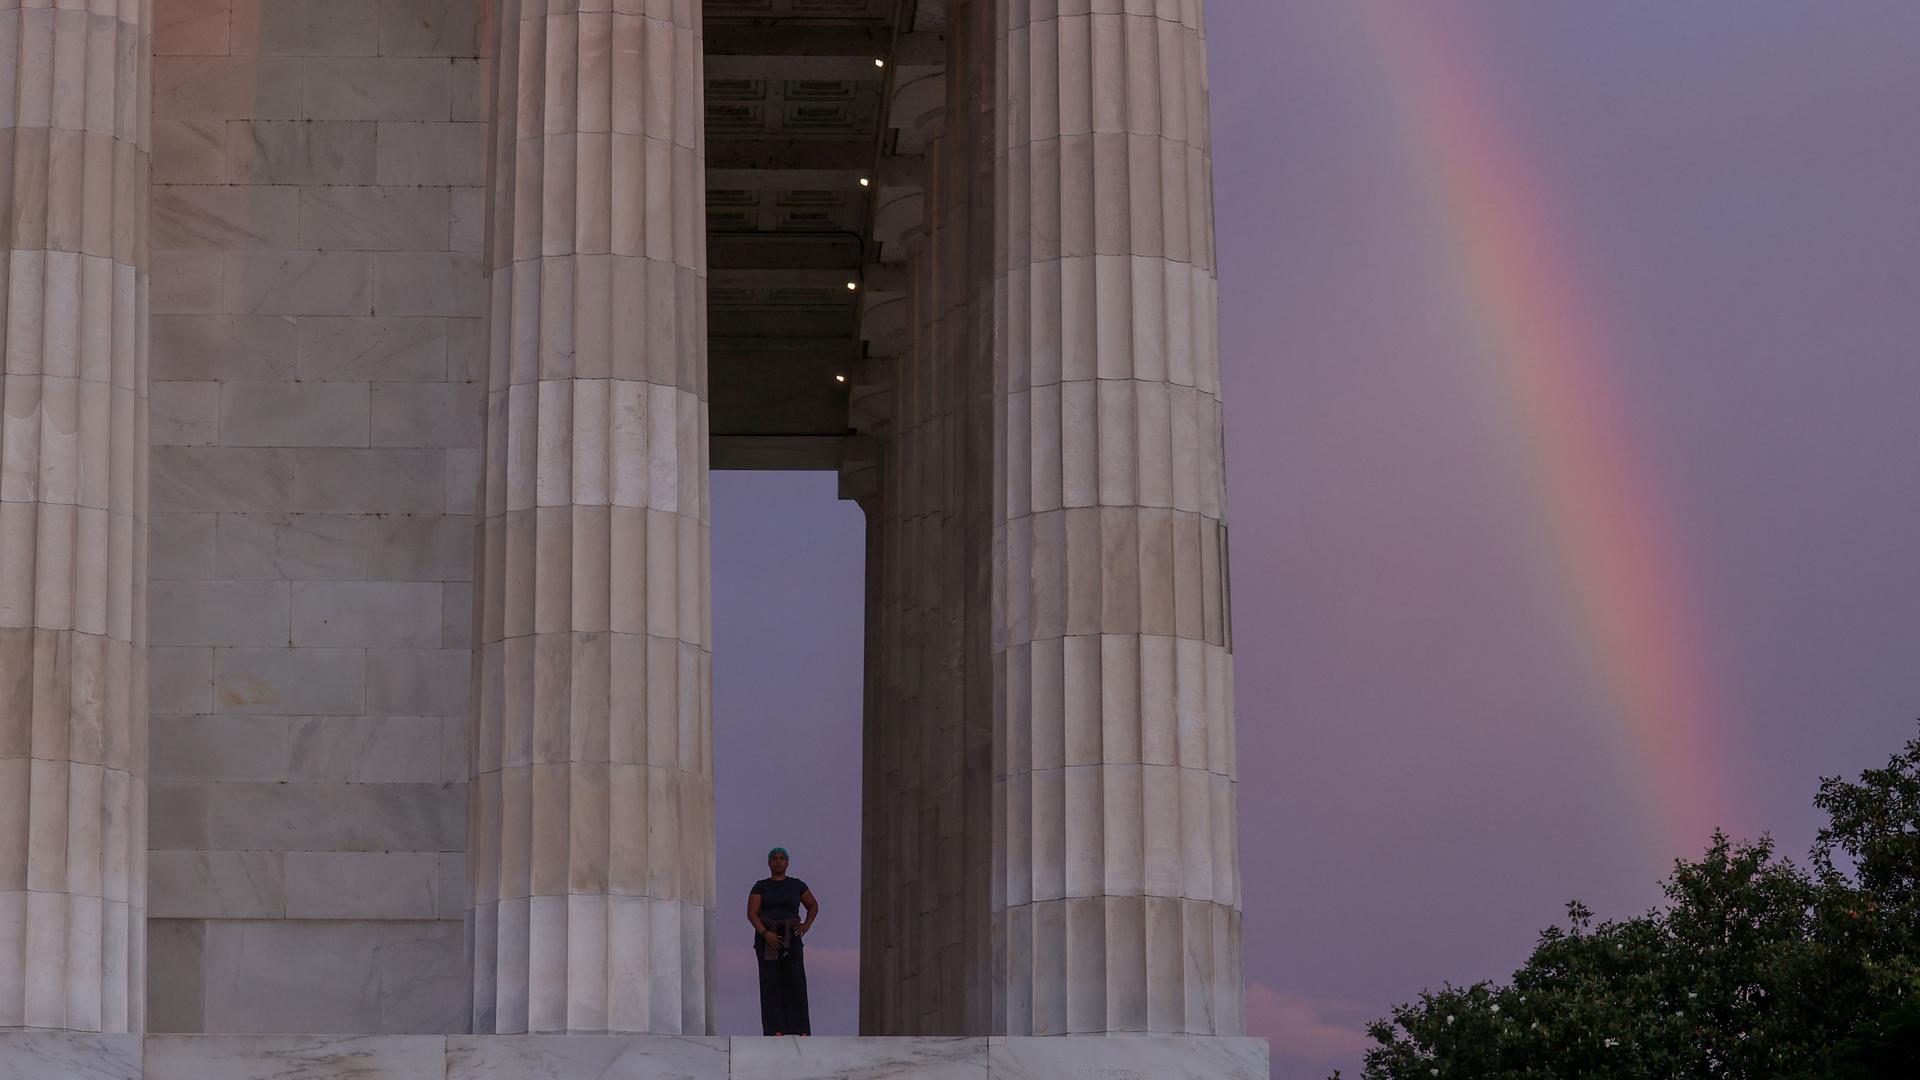 A side view of the Lincoln Memorial shows a woman standing near the large pillars and a rainbow in the distance.